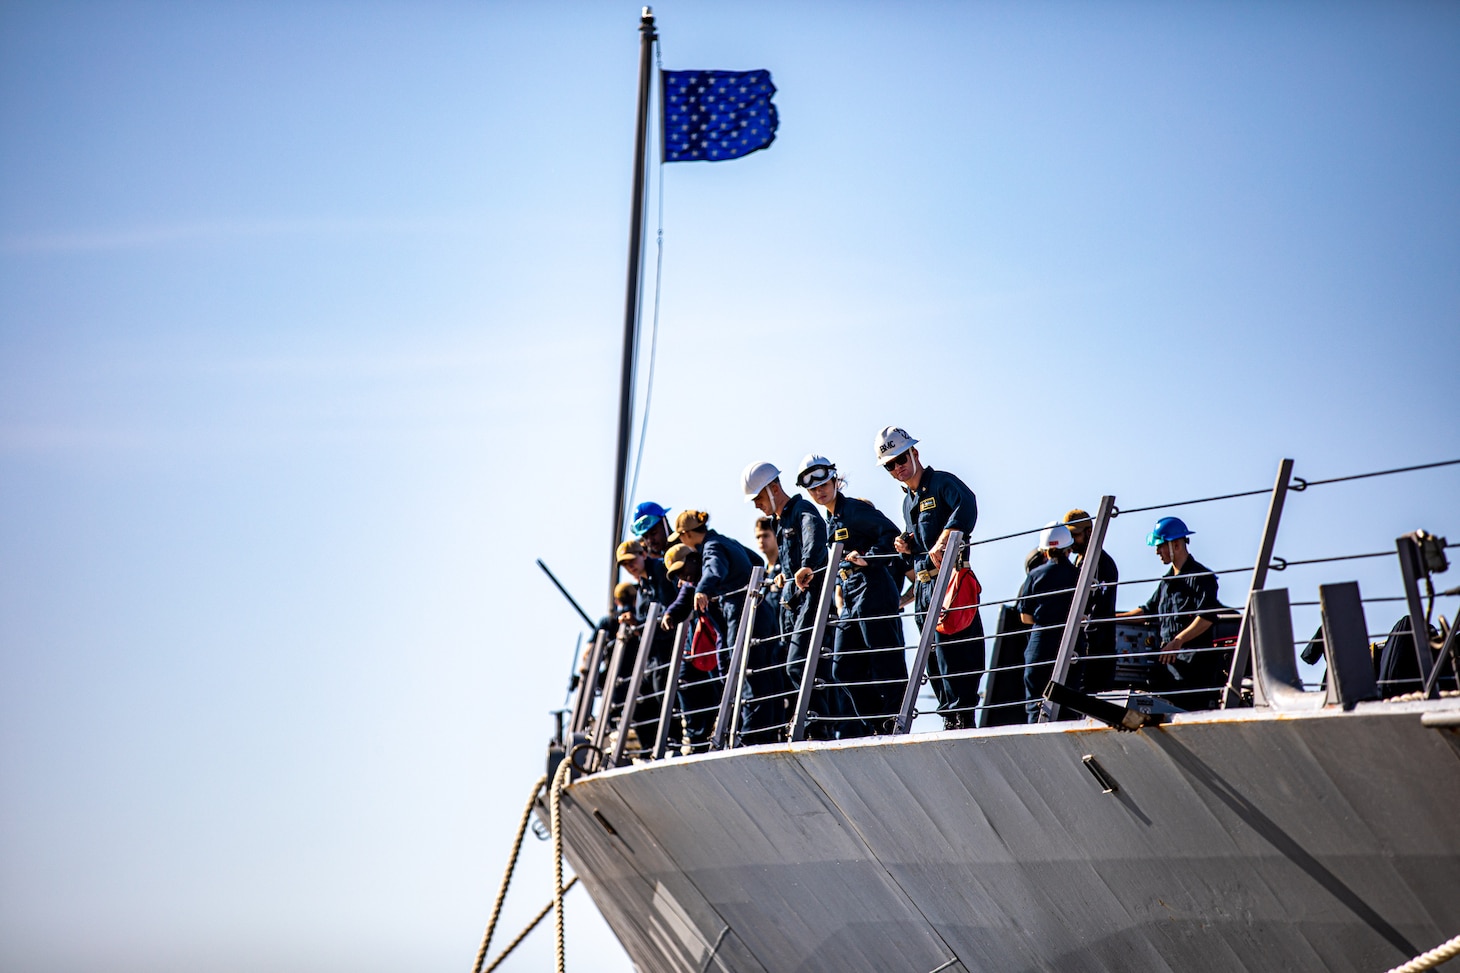 Sailors look on from the fo’c’sle of the Arleigh Burke-class guided-missile destroyer USS Paul Ignatius (DDG 117) as the ship arrives in Tallinn, Estonia for a scheduled port visit, Aug. 20, 2022.